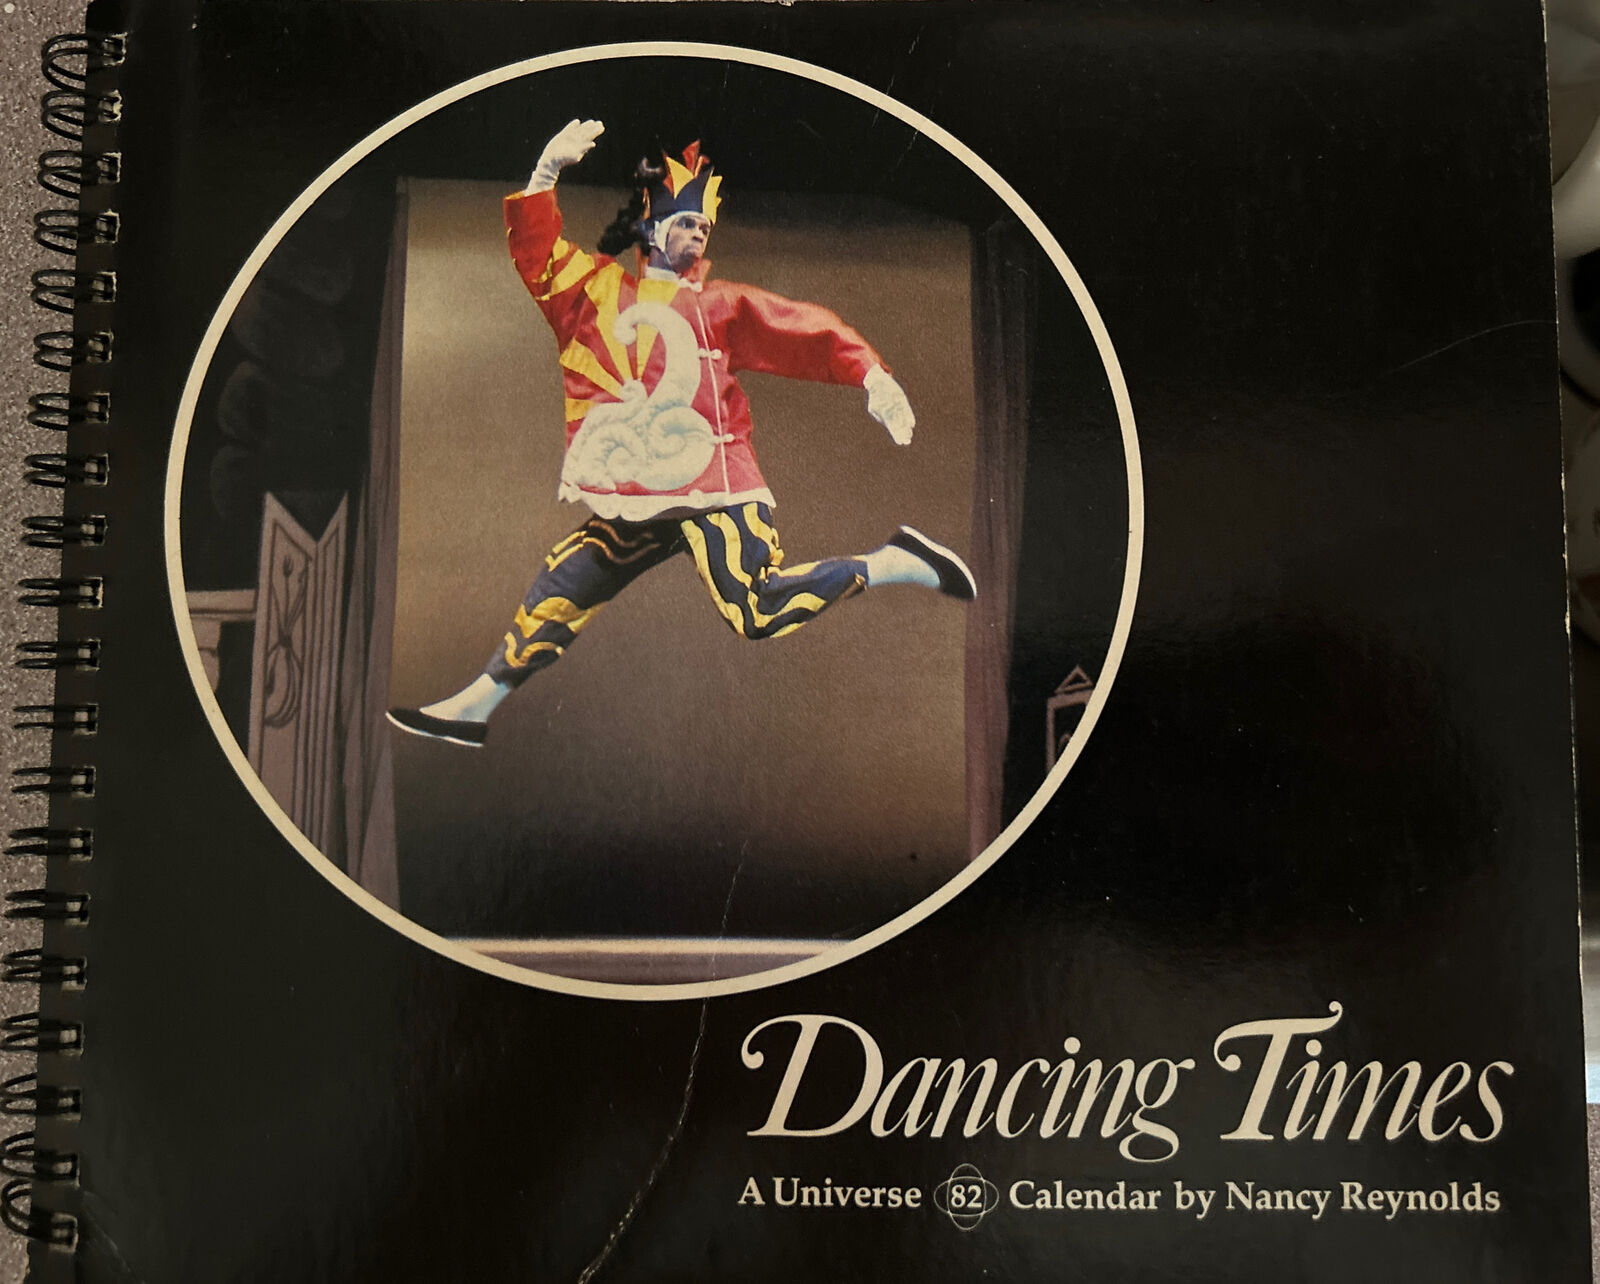 Vtg Dancing Times A Universe 1982 Calendar/Notes by Nancy Reynolds, Clean Pages